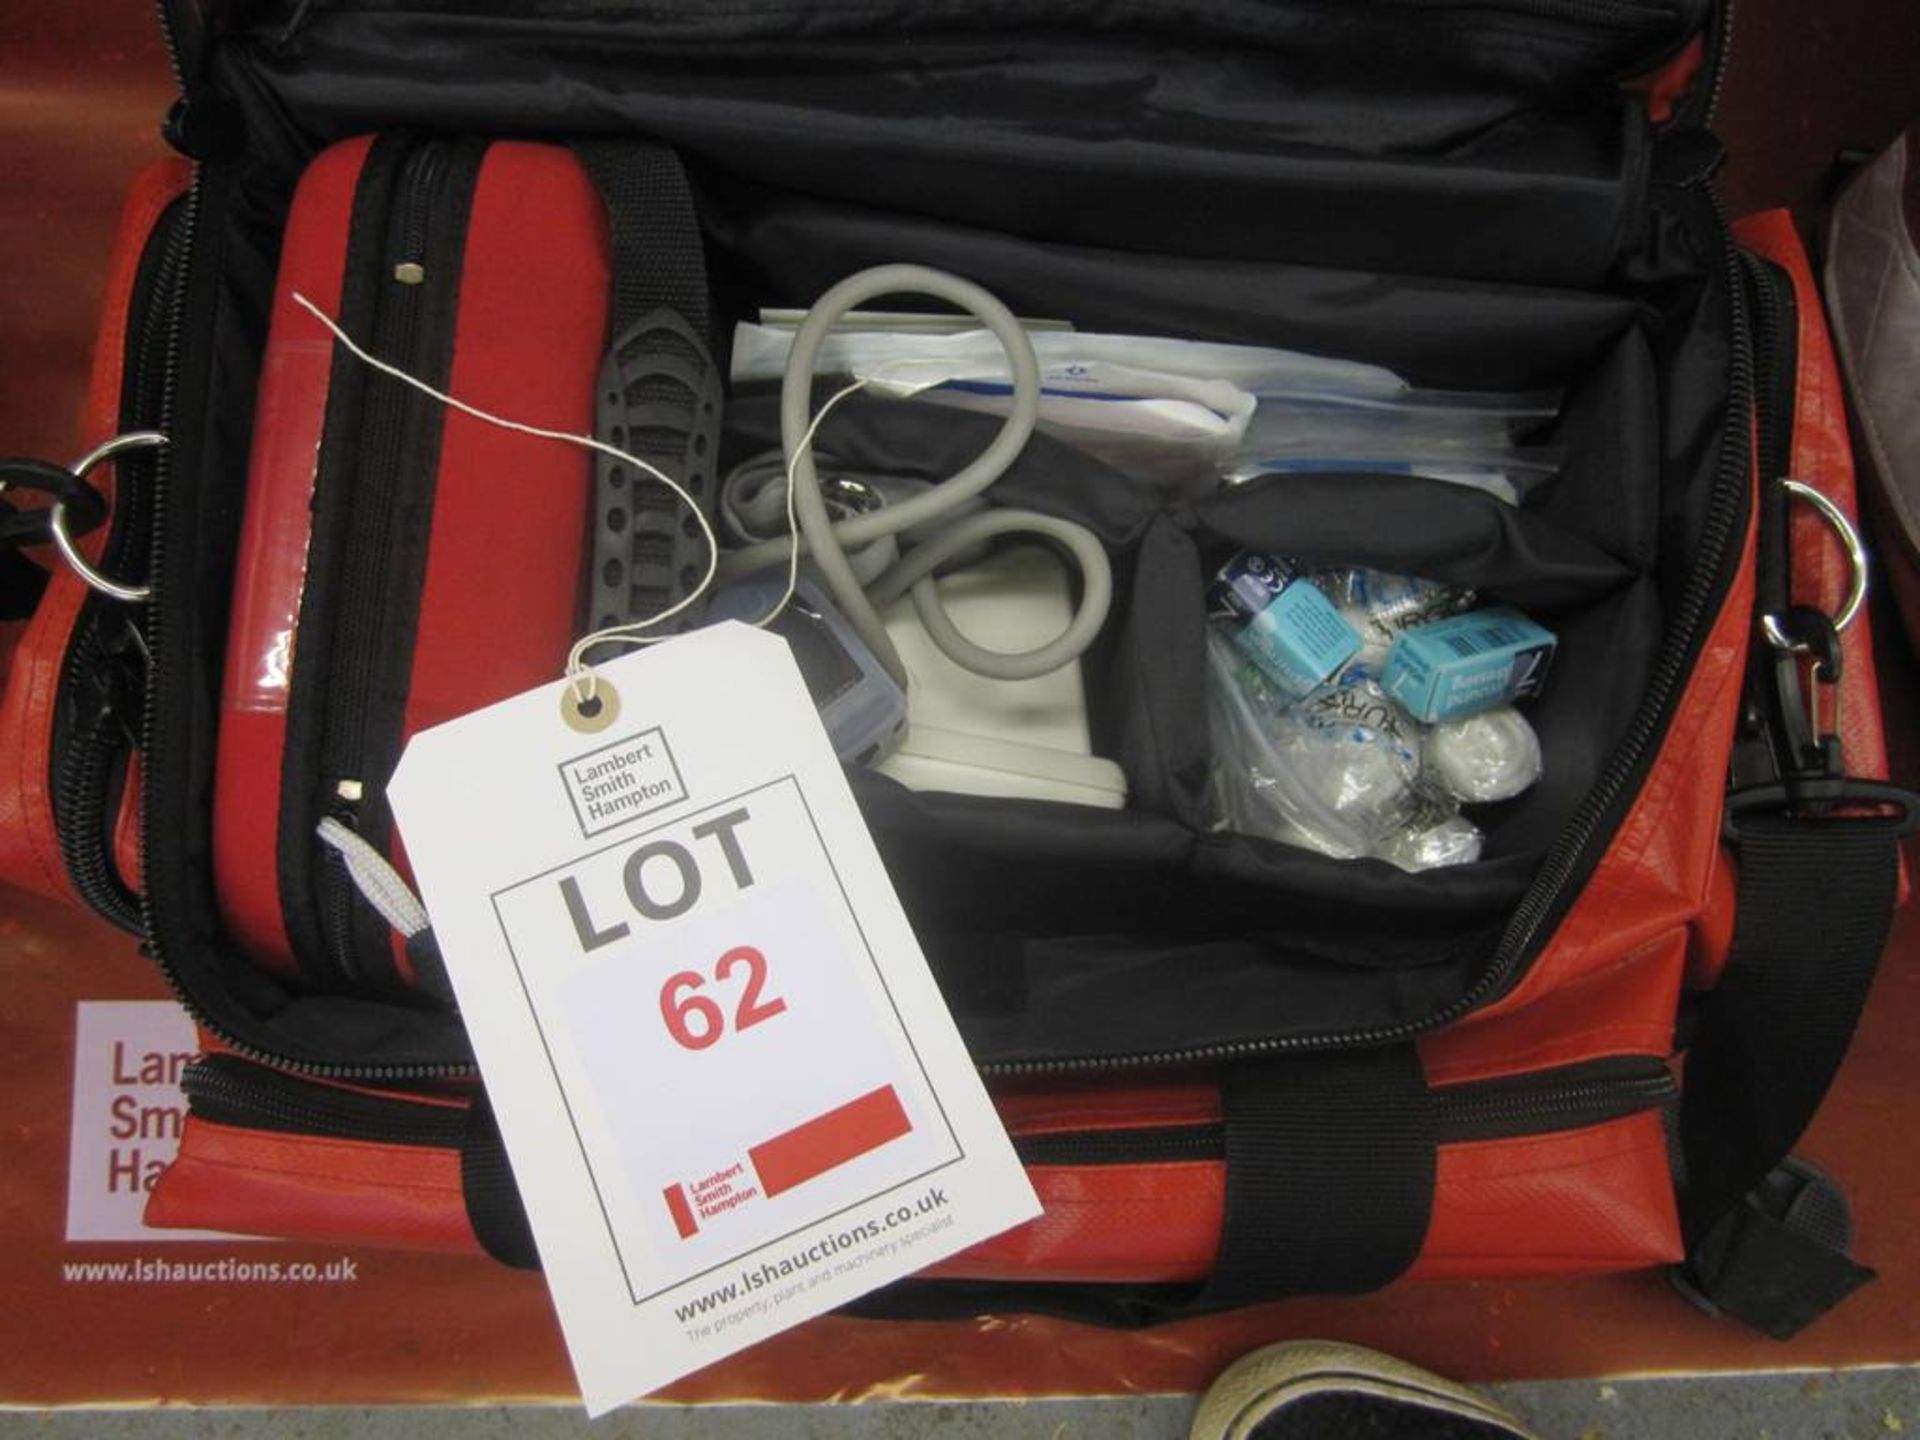 Paramedic First Response carry Go bag and contents, with Laerdal Heart Start defibrillator (NB: Alt.